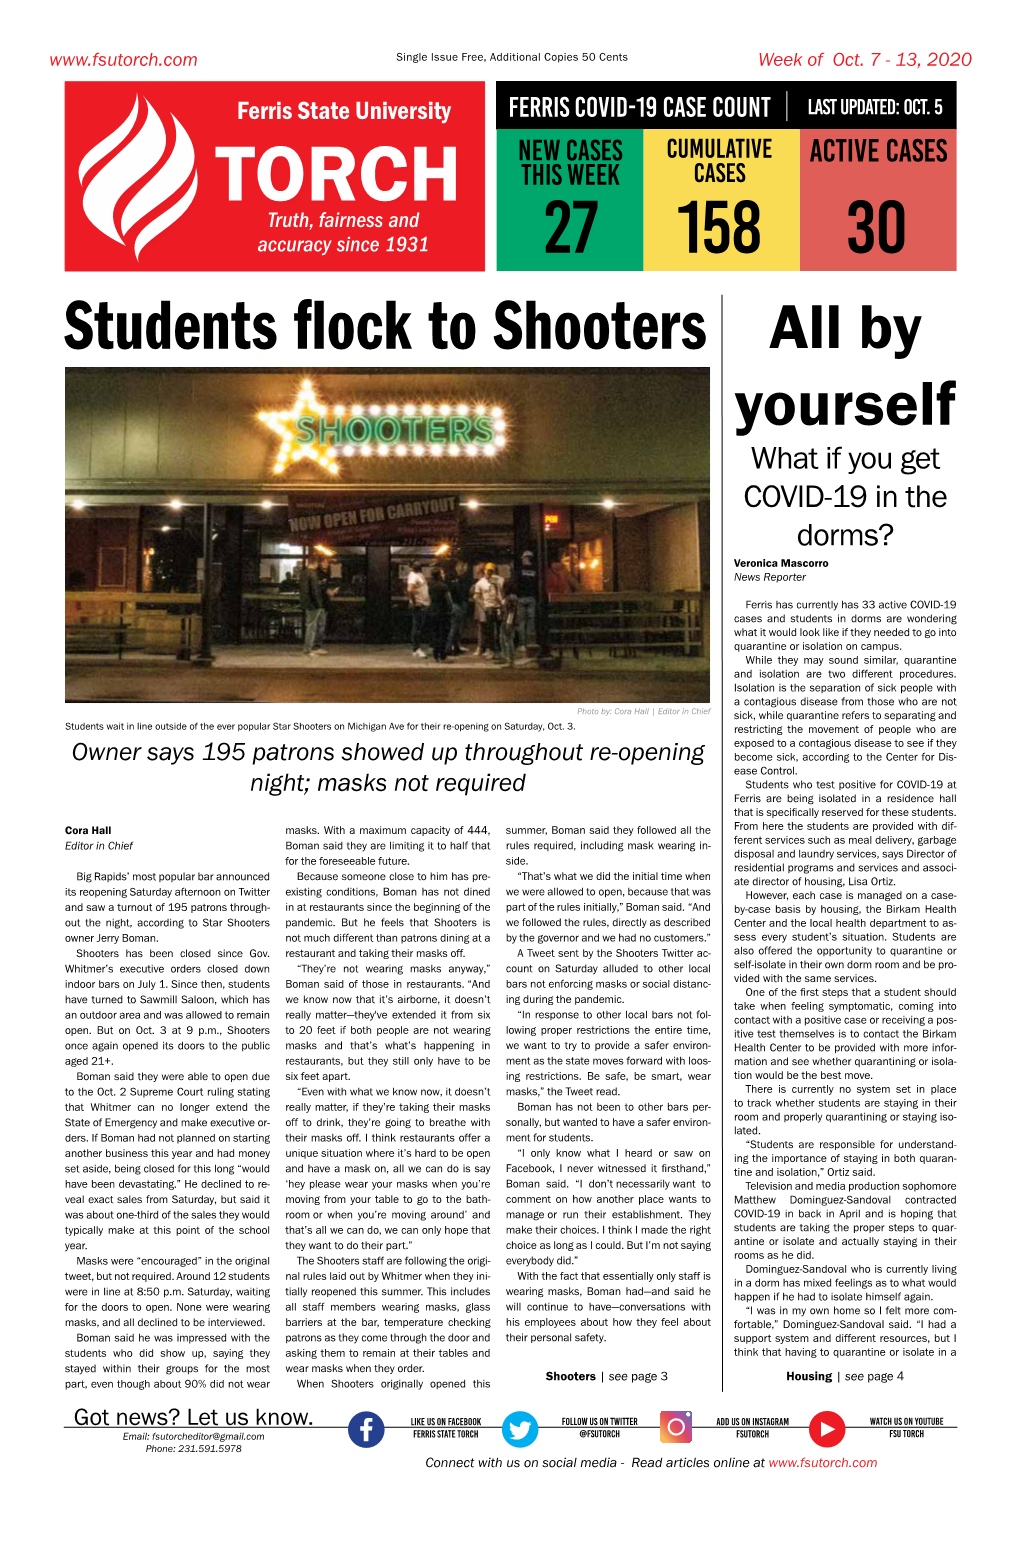 Students Flock to Shooters All by Yourself What If You Get COVID-19 in the Dorms? Veronica Mascorro News Reporter